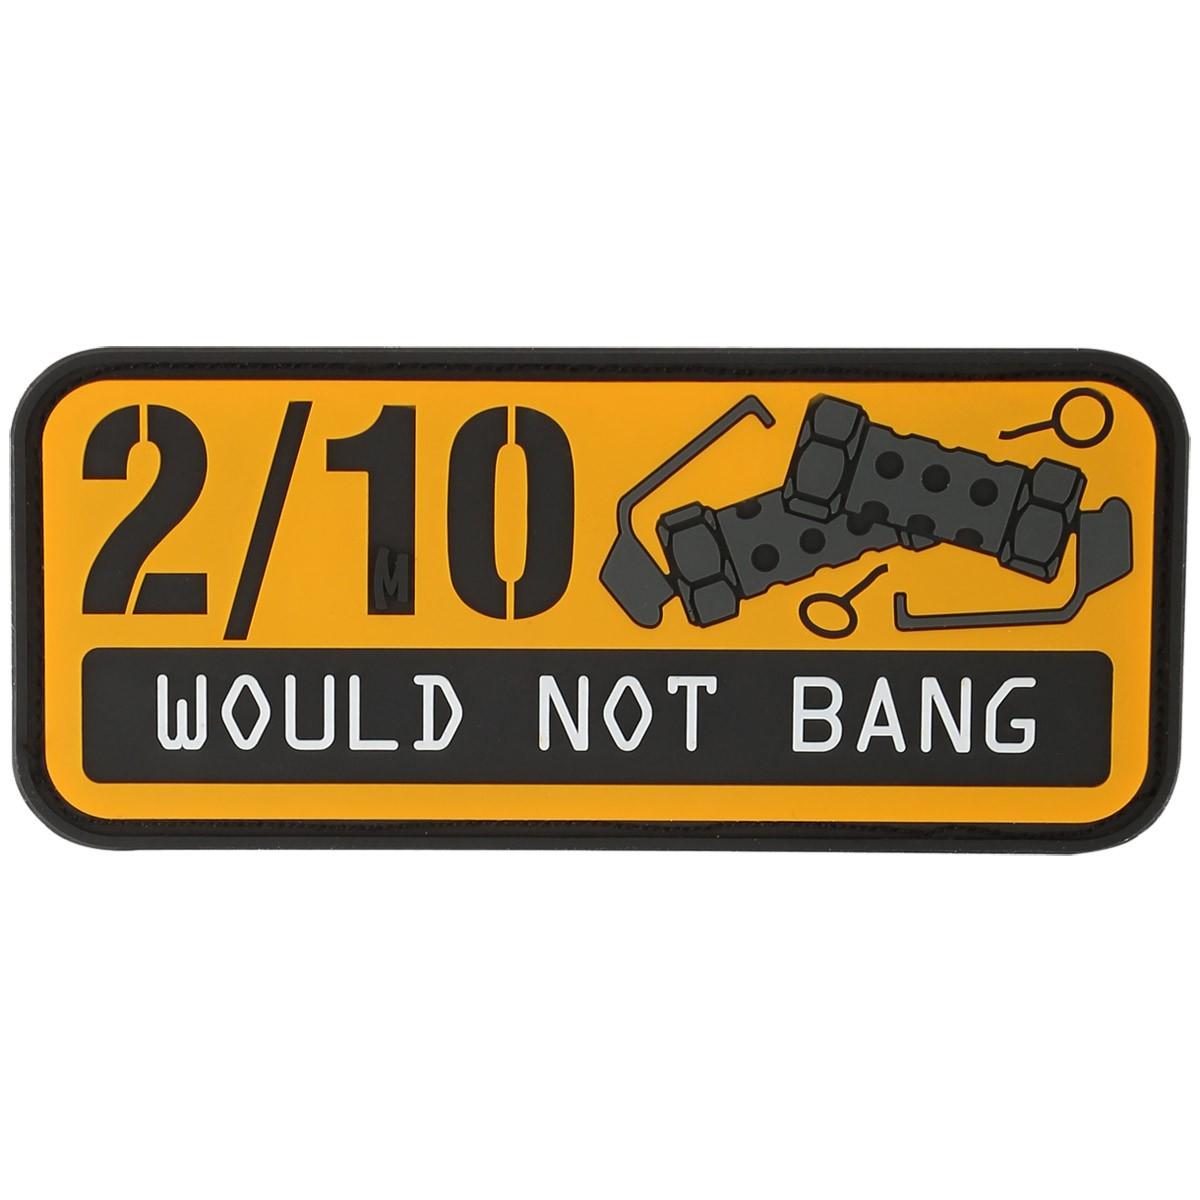 2/10 Would not bang PVC patch